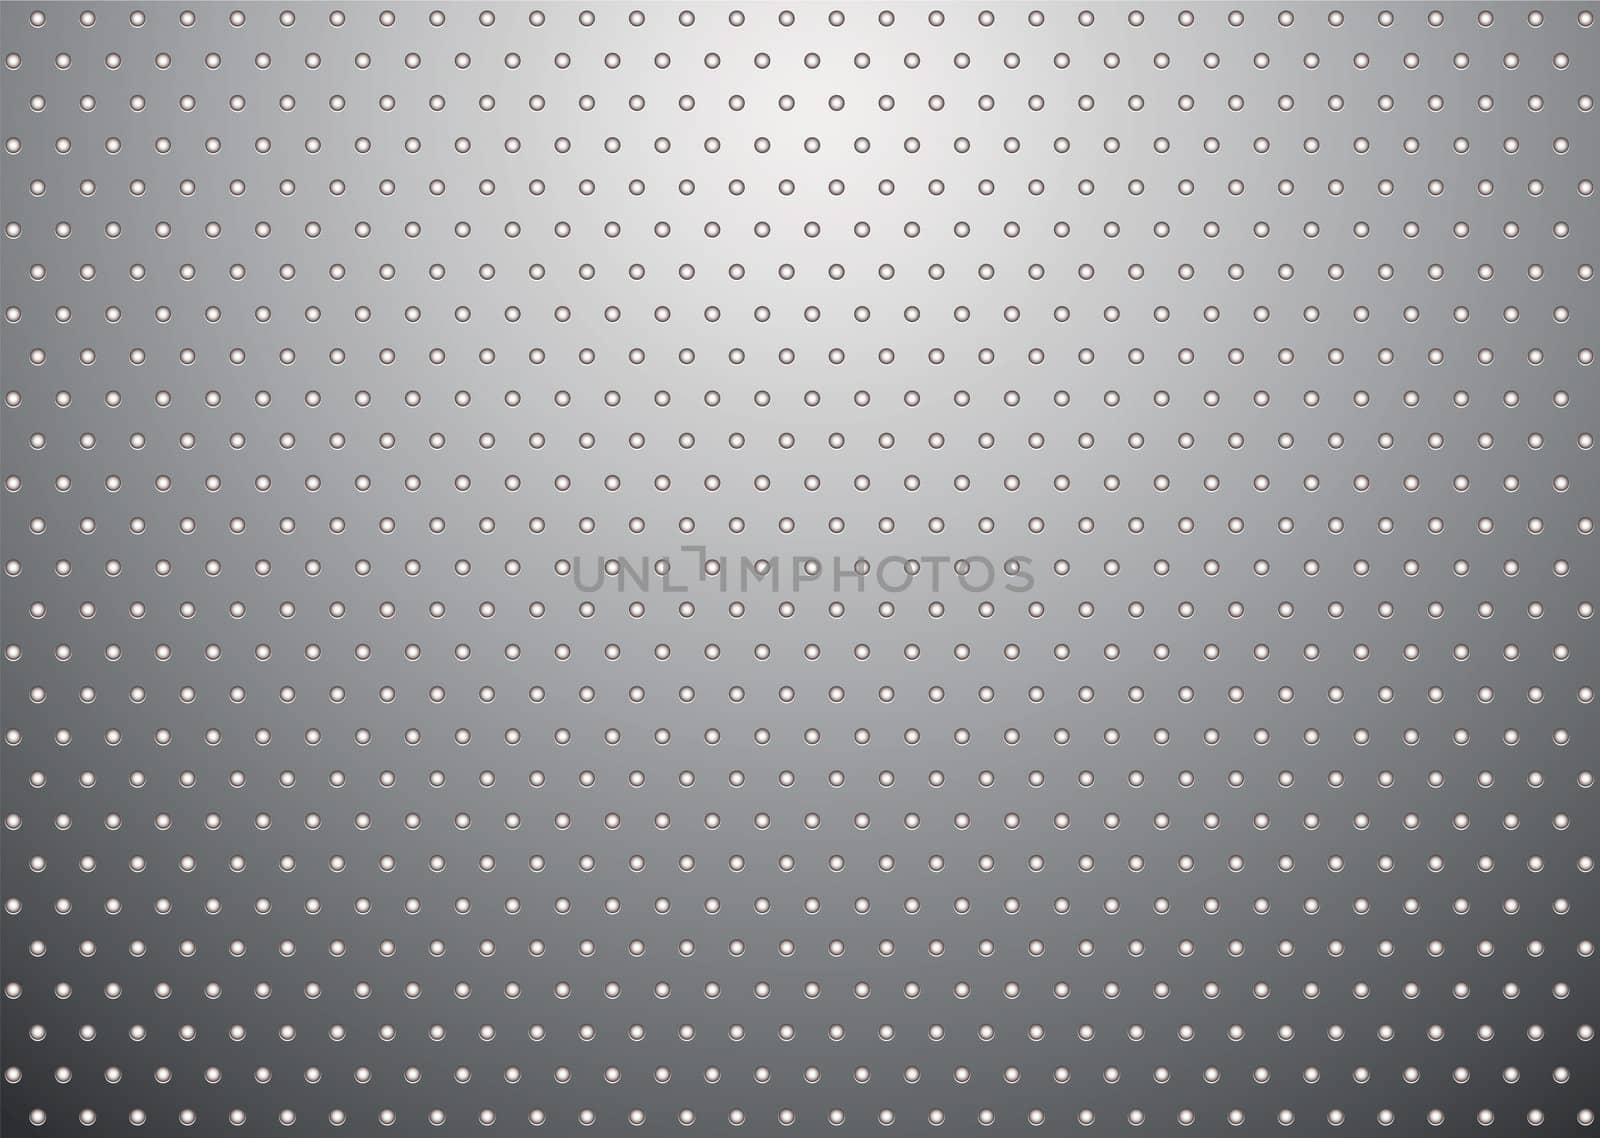 silver metal background bobble by nicemonkey